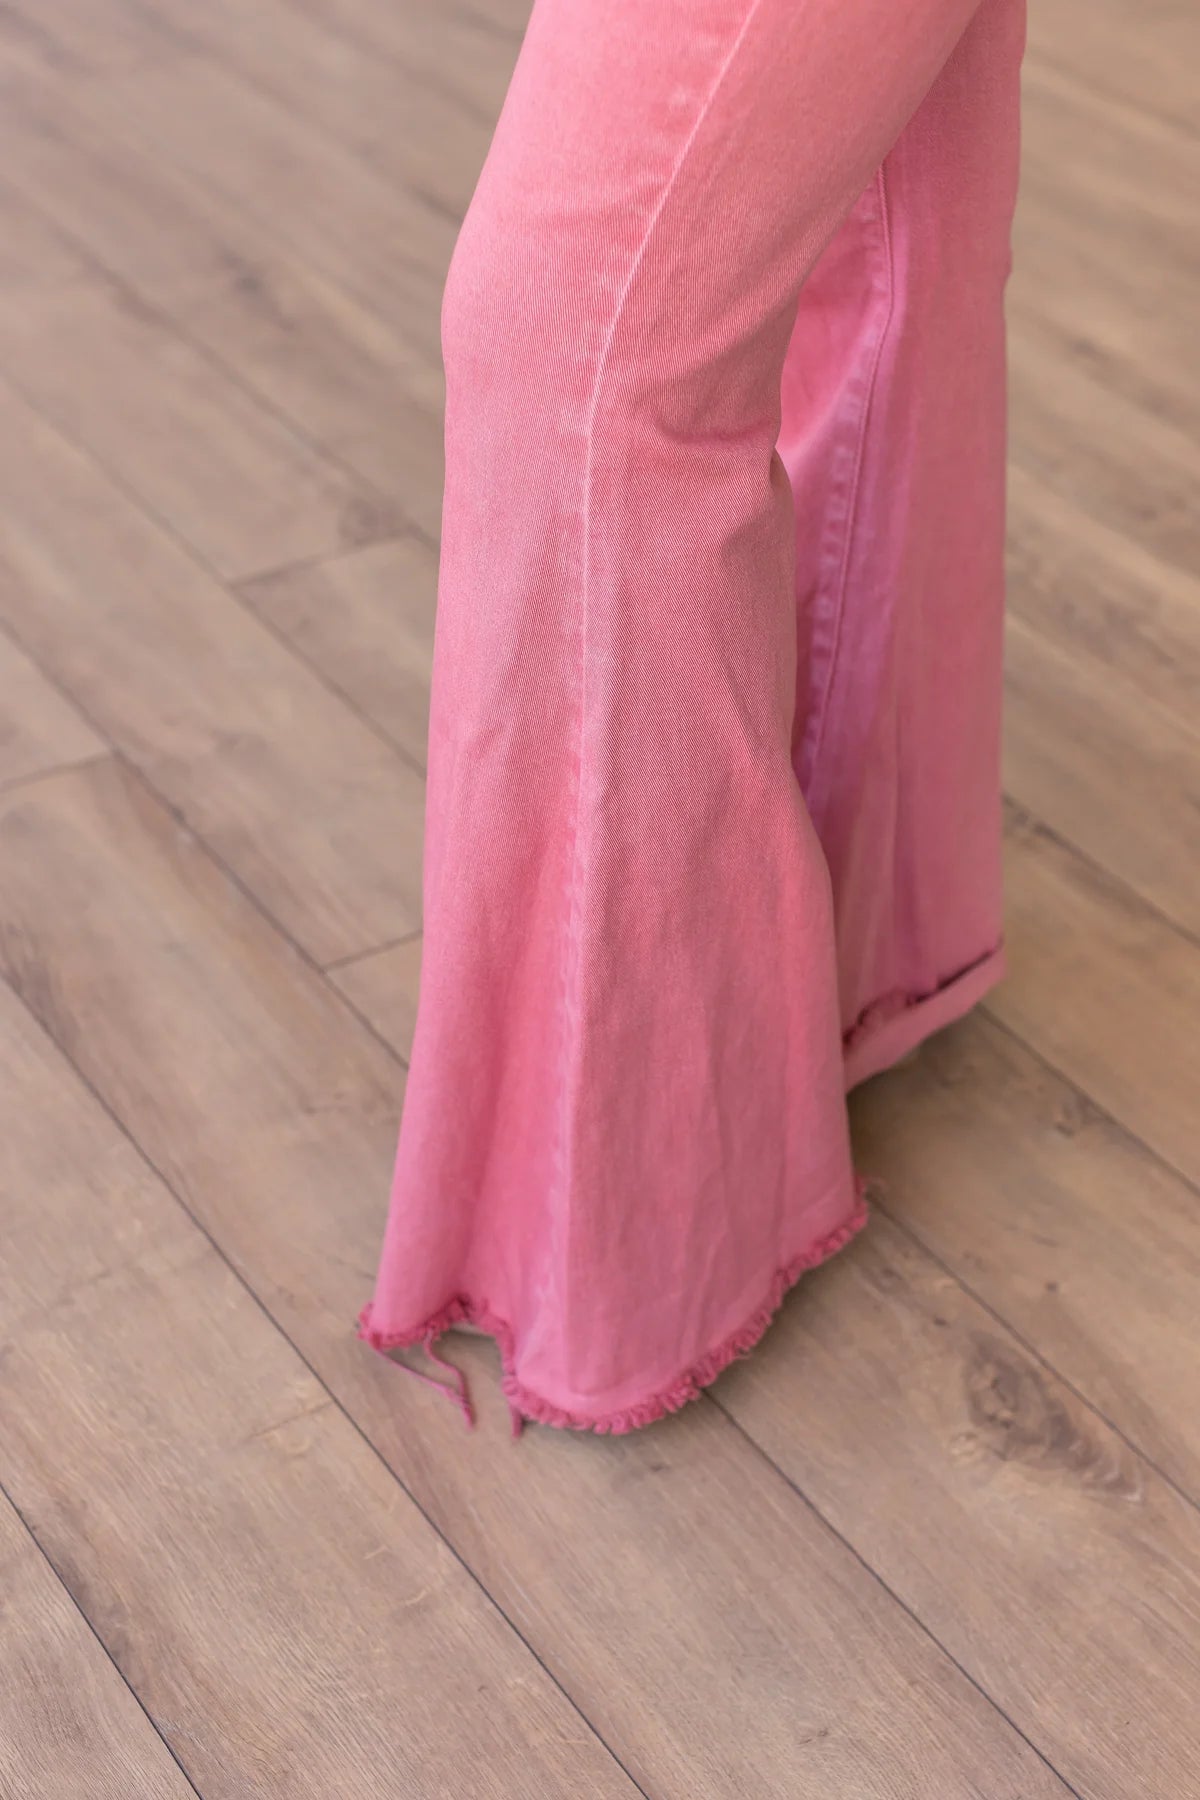 THE STACEY PINK DENIM BELL BOTTOMS BY GRACE & EMMA